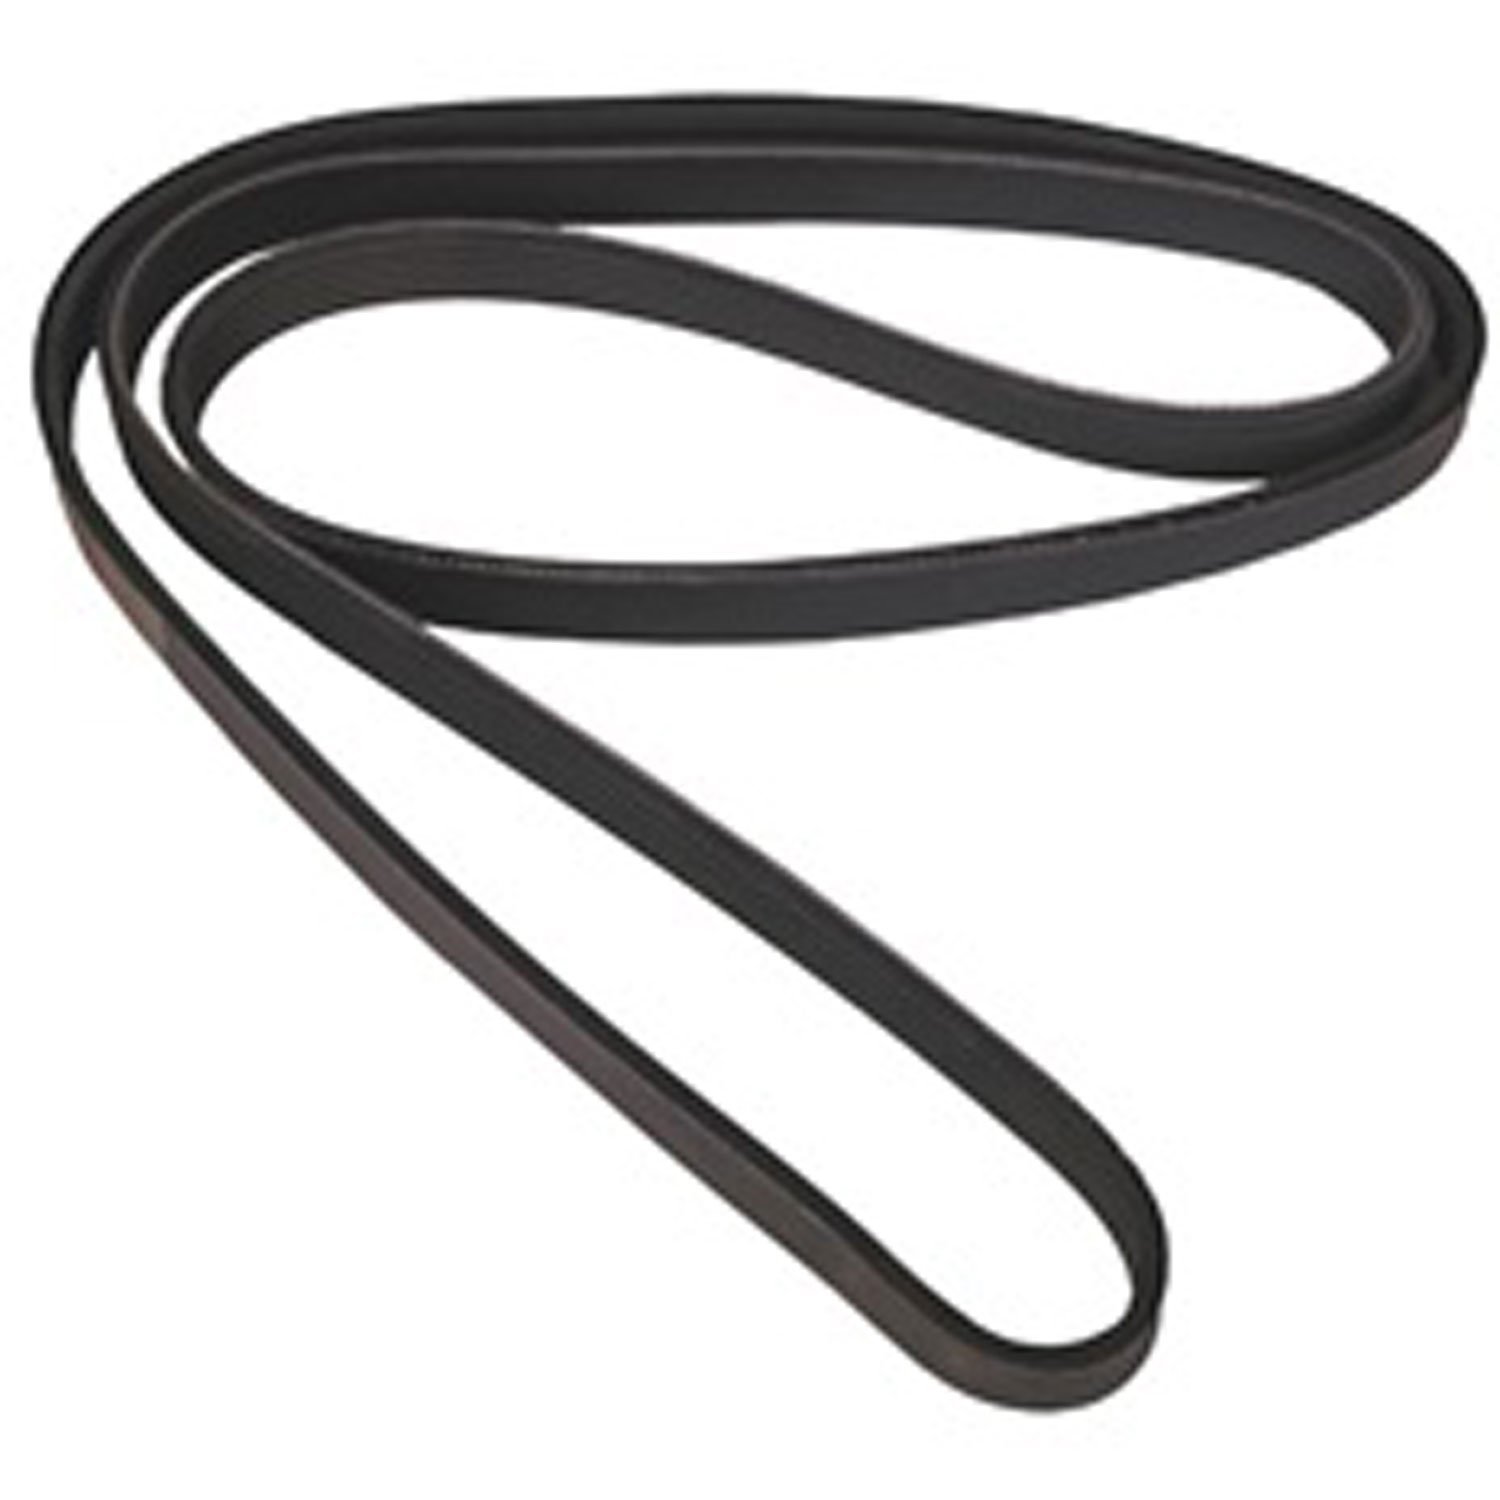 Stock replacement serpentine belt from Omix-ADA, Fits 91-94 Jeep Wrangler YJ with 4-cylinder